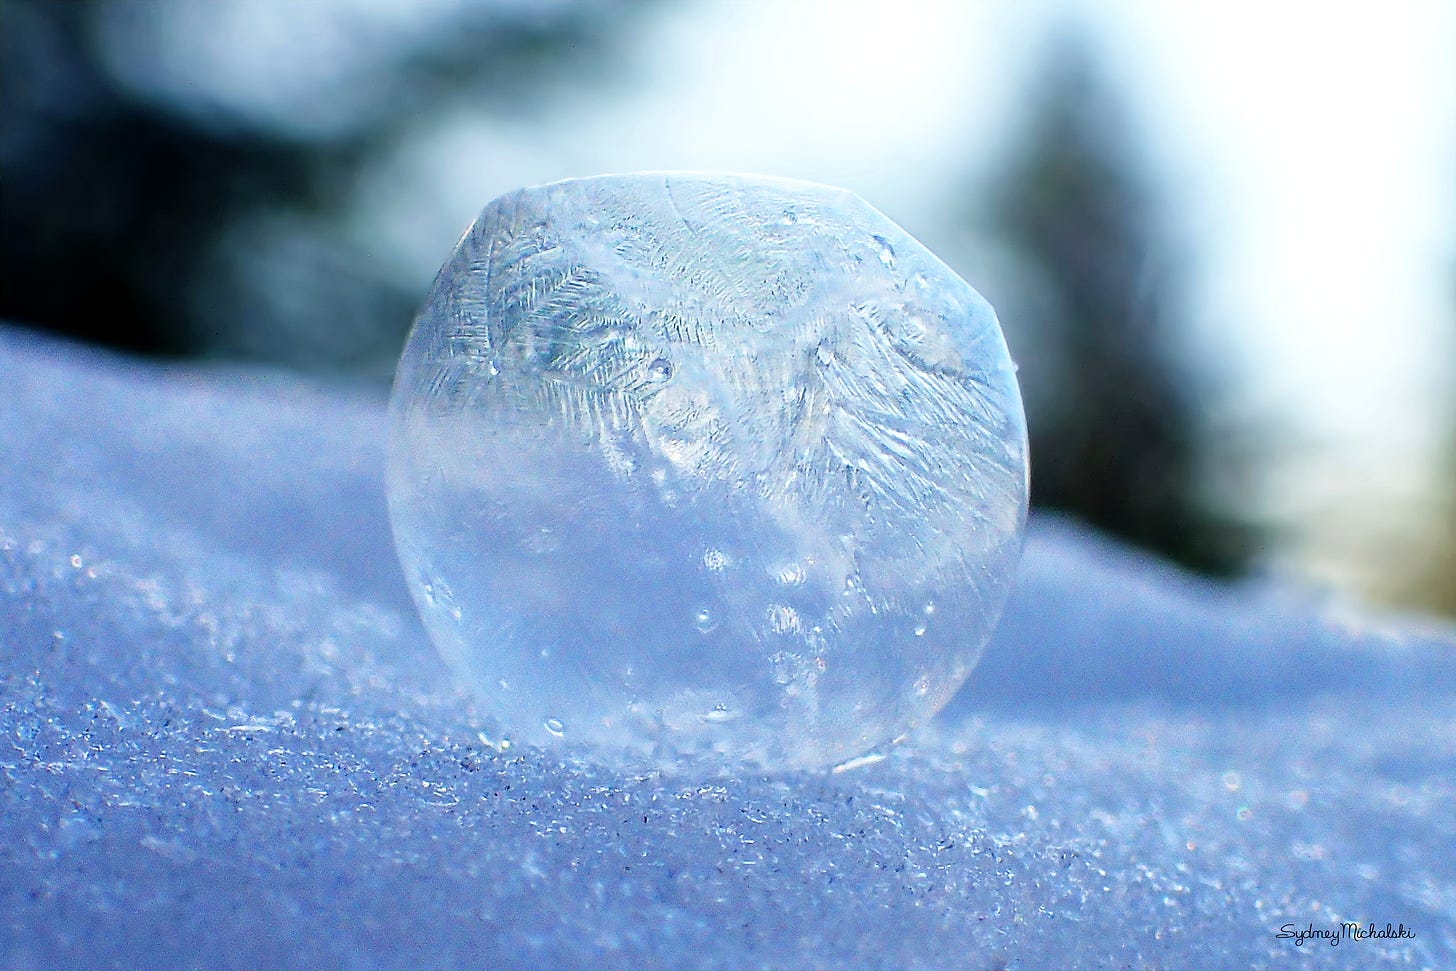 A frozen bubble begins to deflate in a snowy forest.